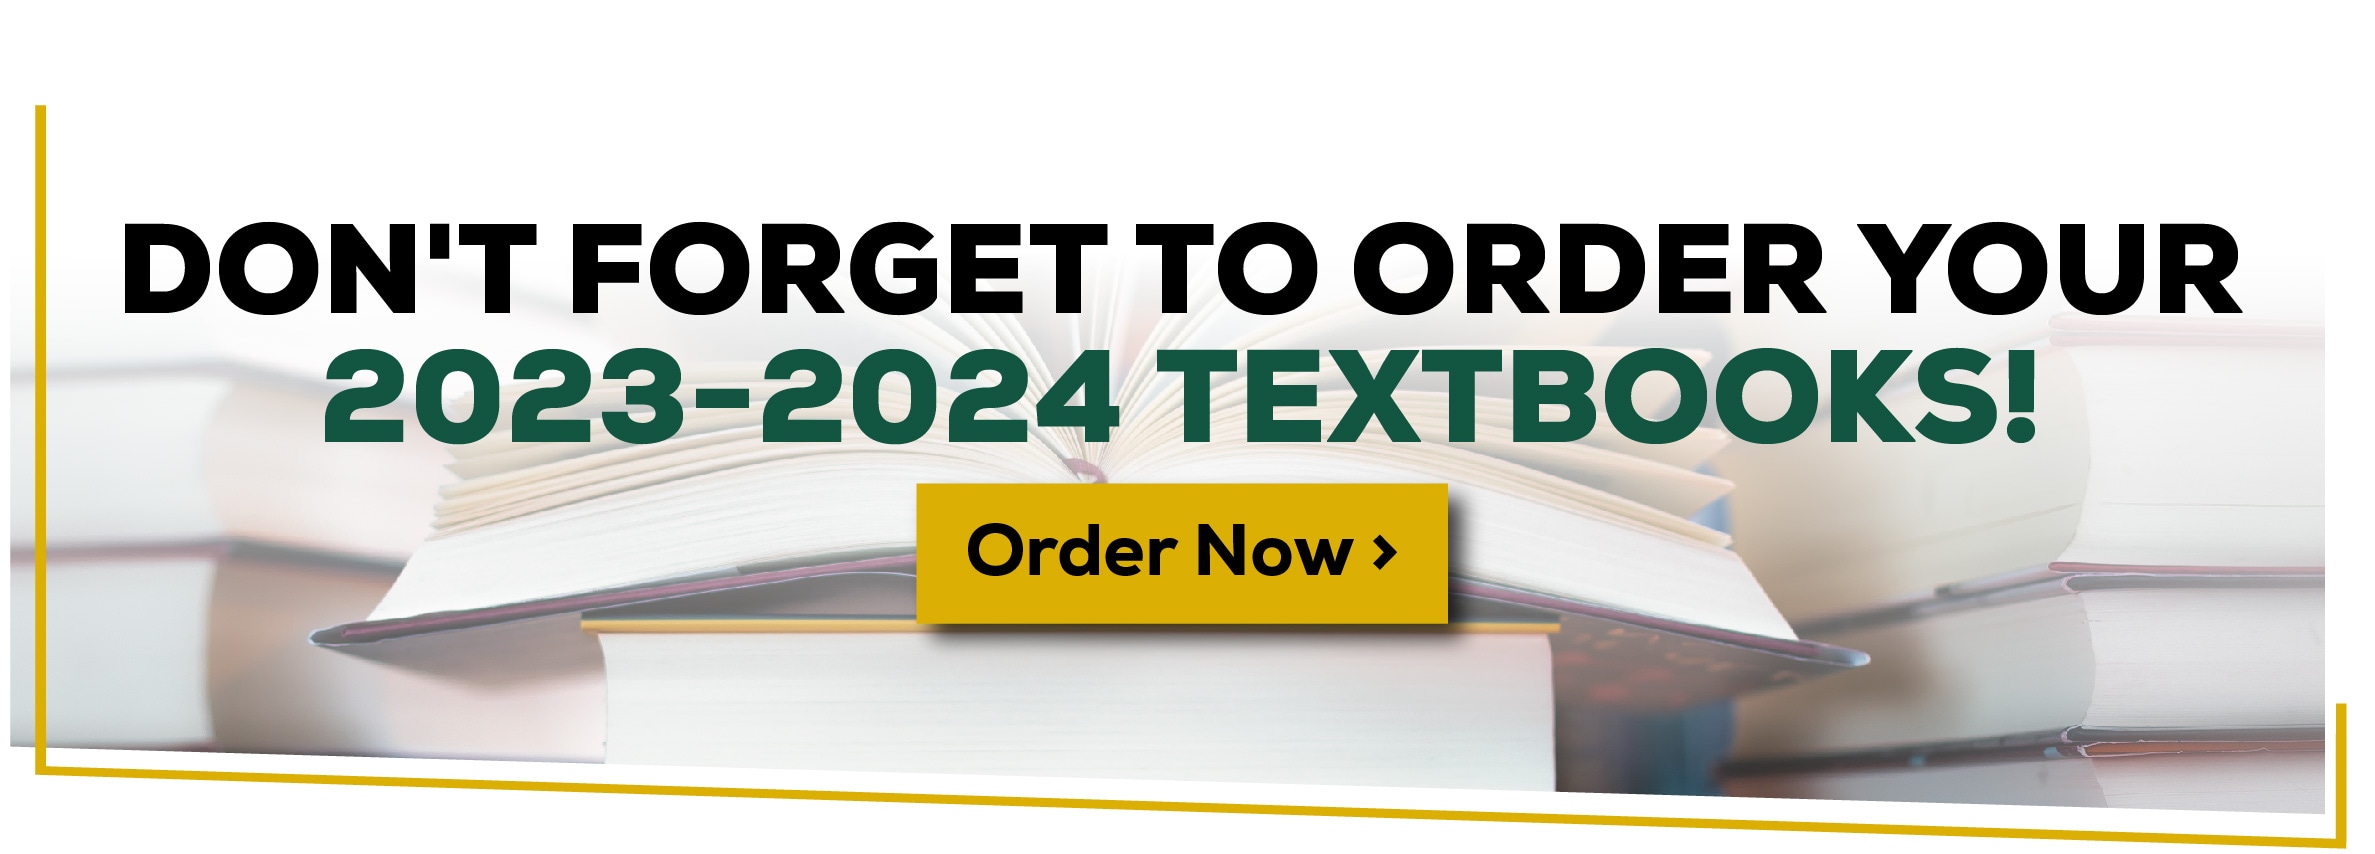 Don't Forget to Order Your 2023-2024 Textbooks! Order Now